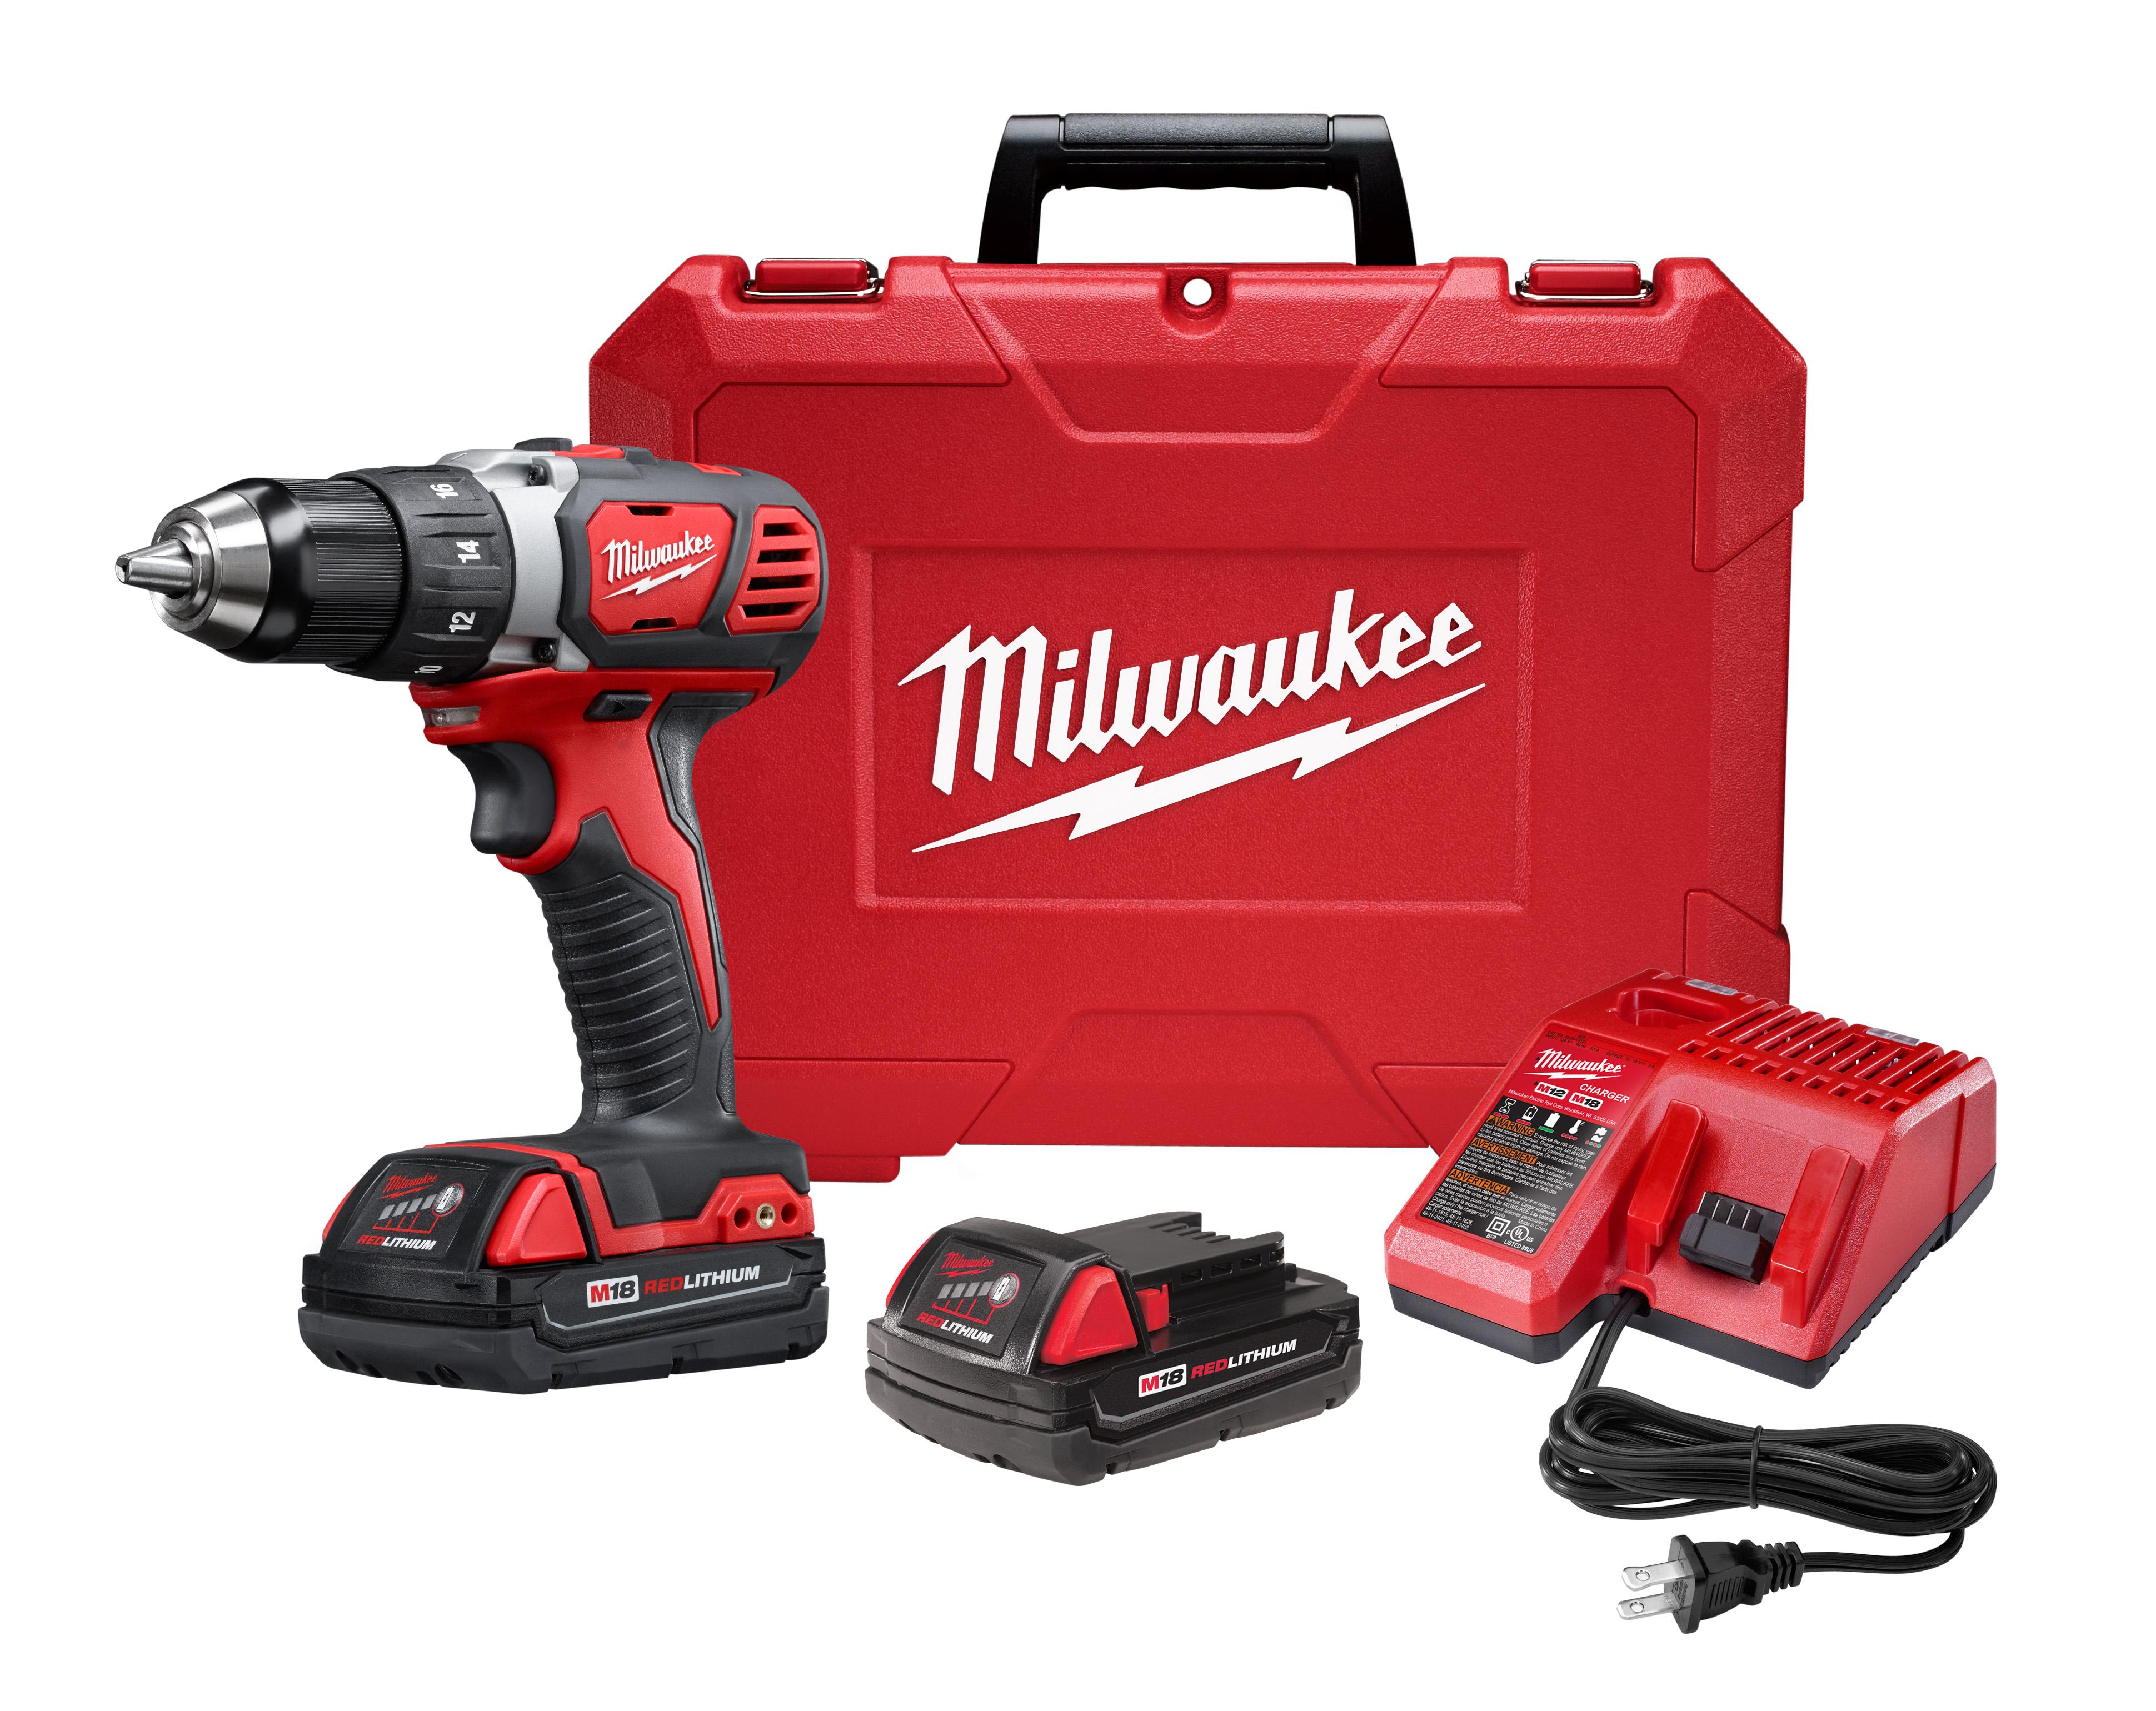 Milwaukee® M18™ 2606-20 Cordless Drill/Driver, 1/2 in Chuck, 18 VDC, 0 to 400/0 to 1800 rpm No-Load, 7-1/4 in OAL, Lithium-Ion Battery